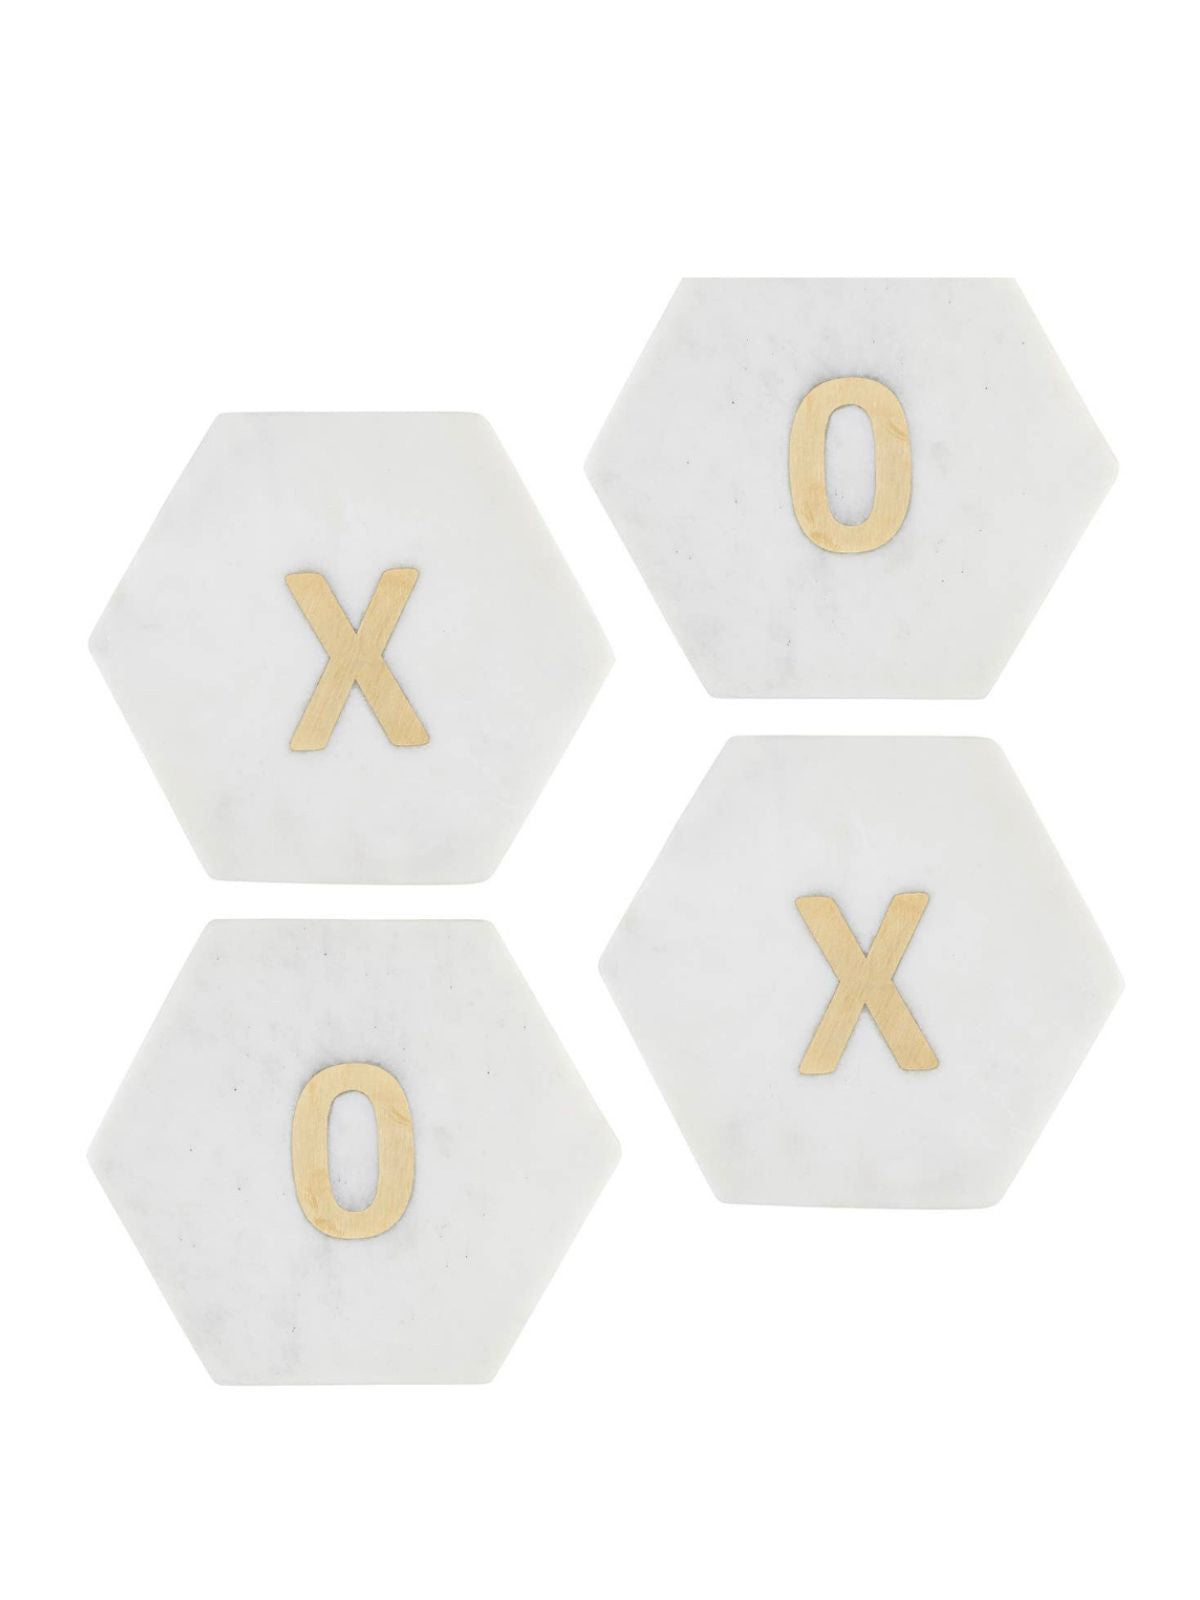 Add a loving touch to your home with our White Marble XOXO Coaster Set. This set includes 4 white marble coasters in the shape of hexagons, 2 with an X and 2 with an O at the center. Available at KYA Home Decor